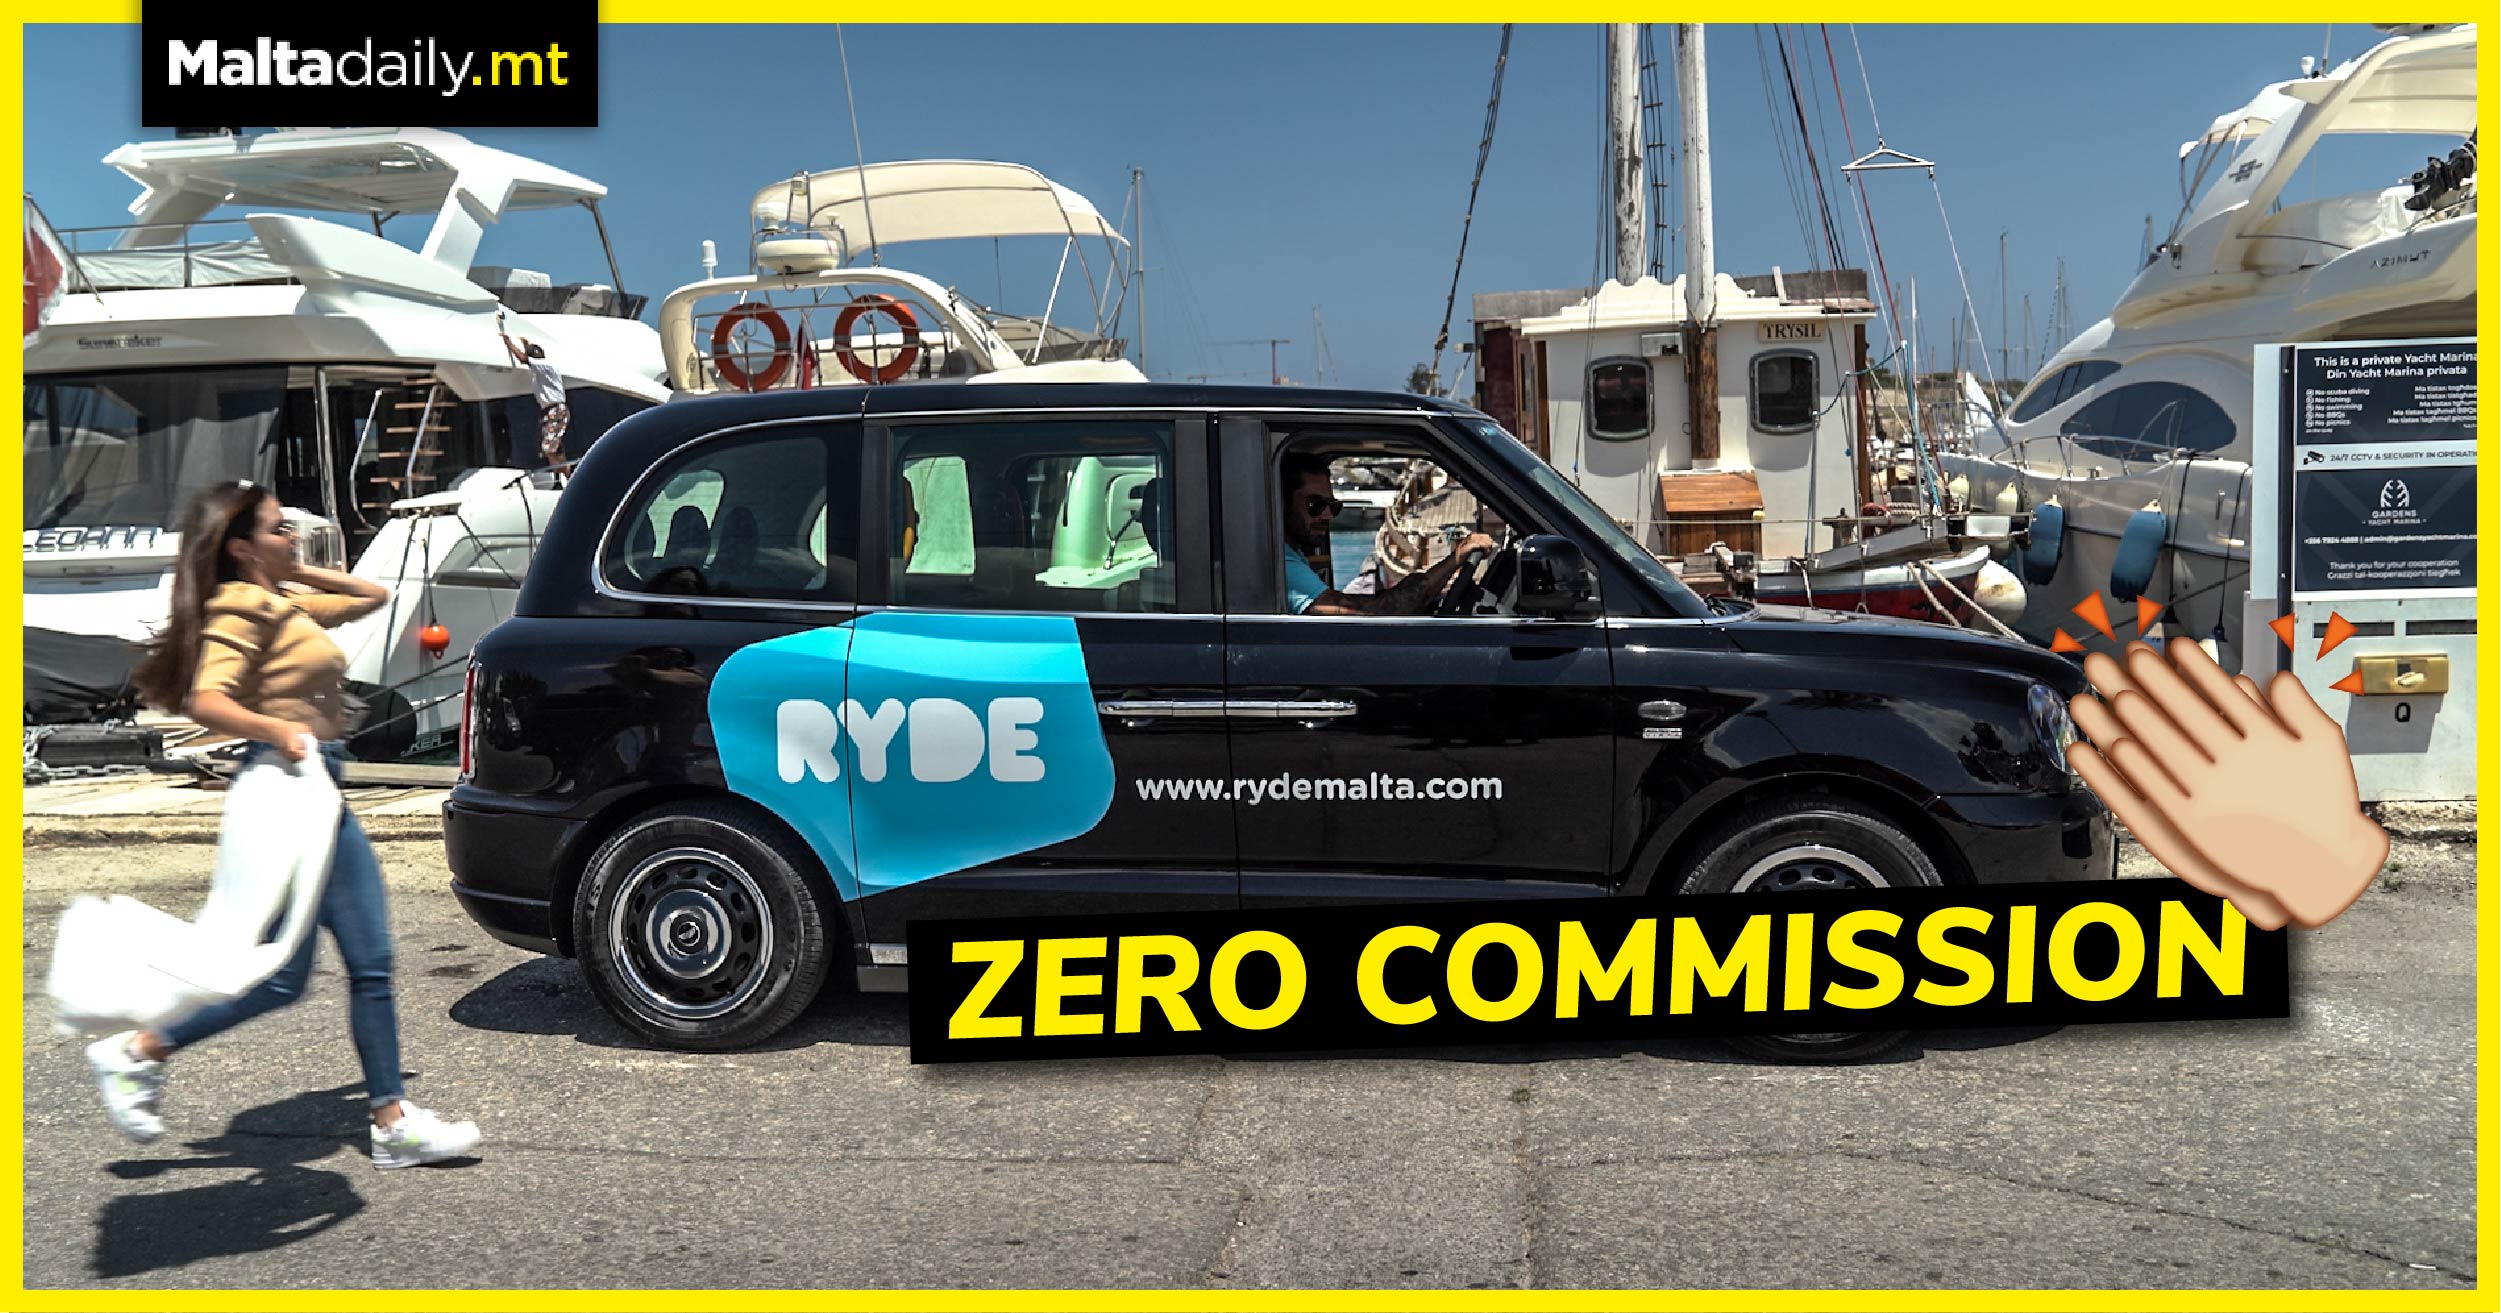 Mobility Company Ryde Technologies with ground-breaking "Zero Commission" recovery initiative for drivers